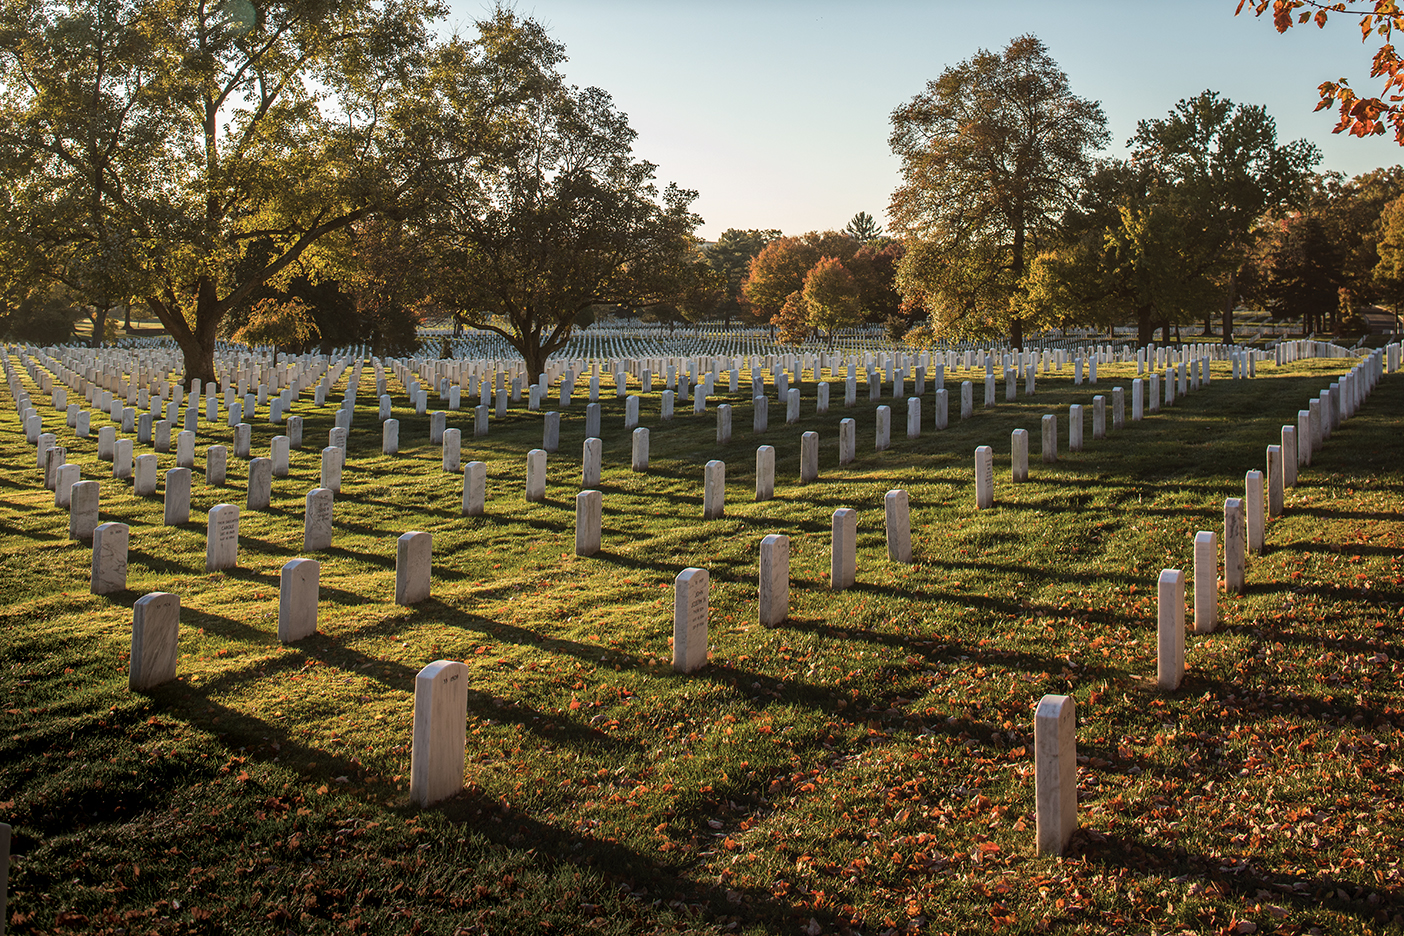 Shadows are cast on the ground by the tombs of Arlington's 400,000 war dead.